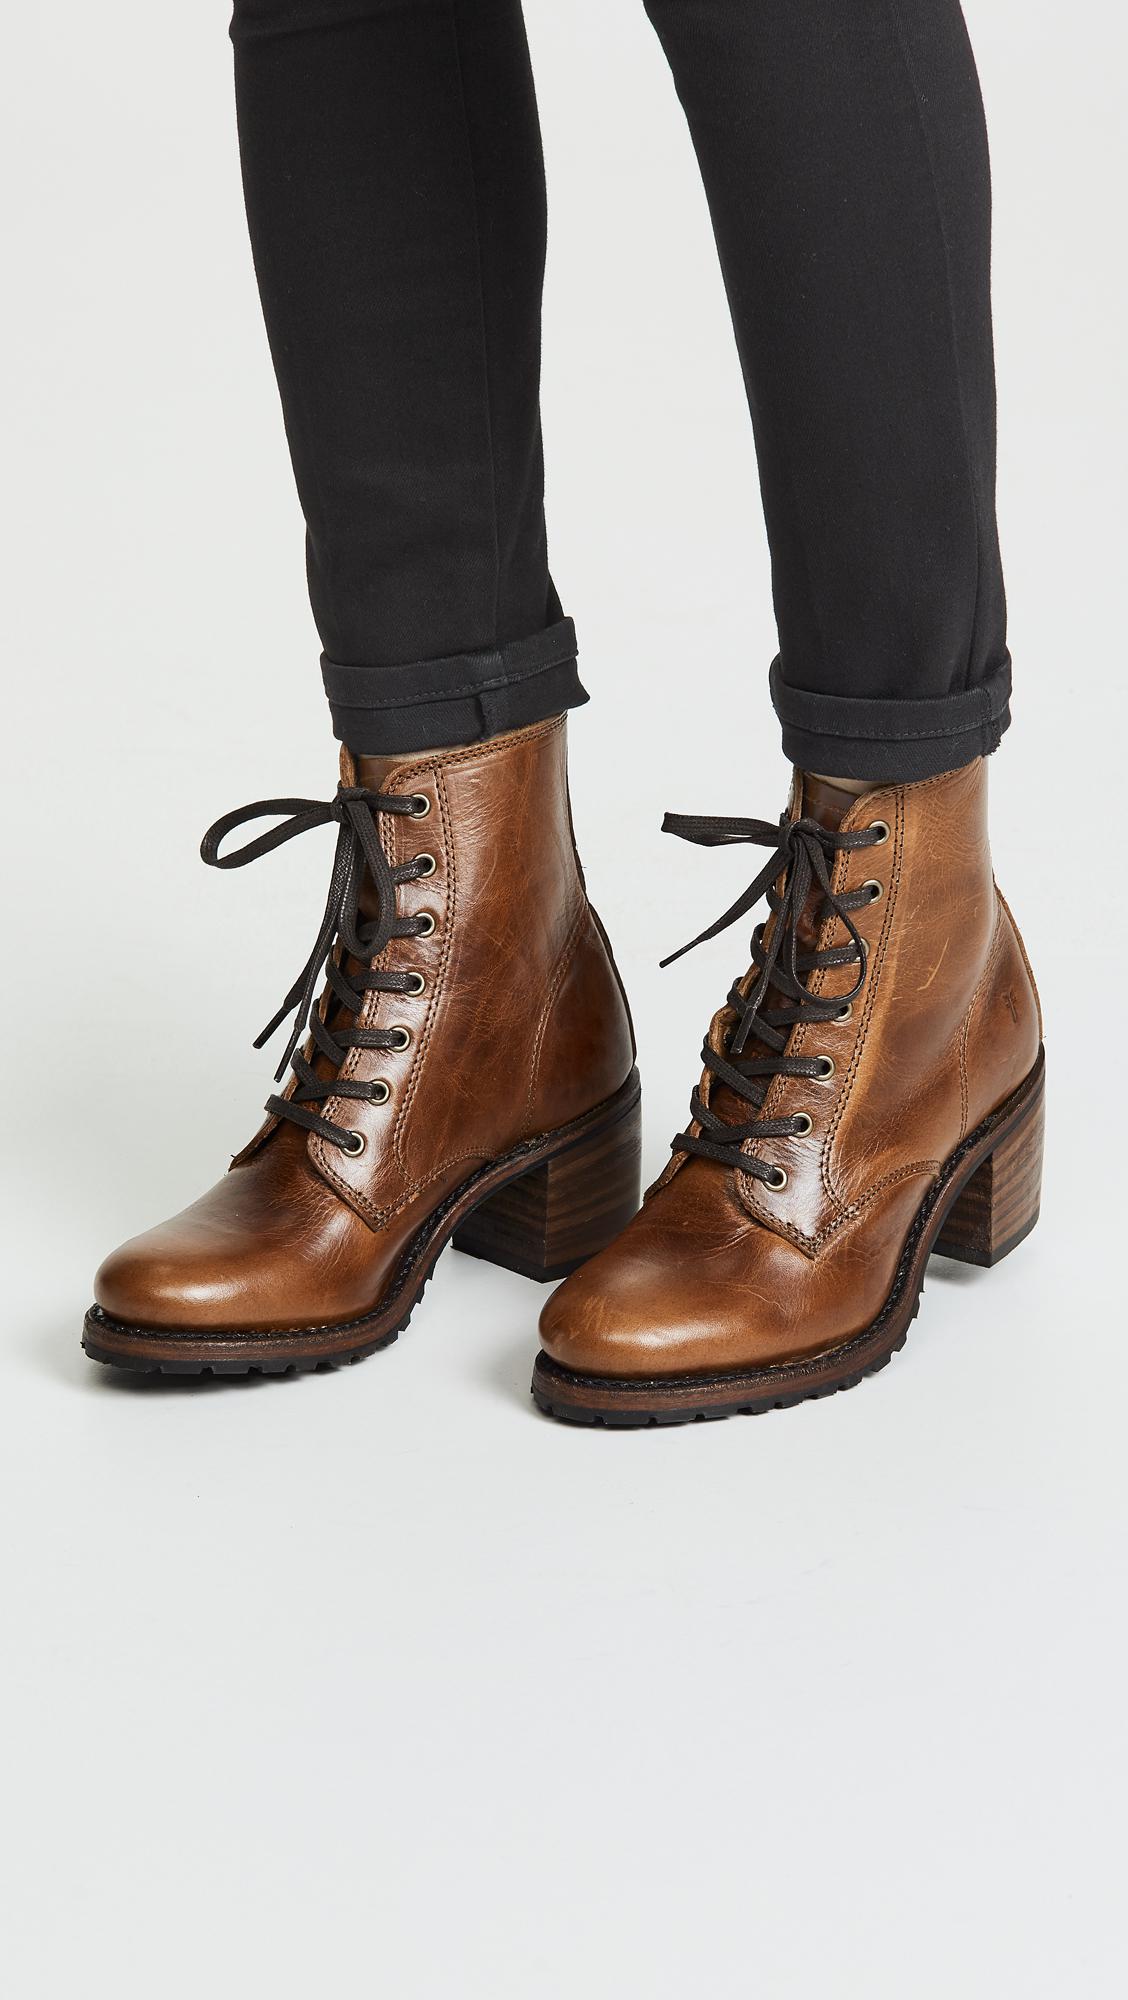 Frye Leather Sabrina 6g Boots in Cognac 